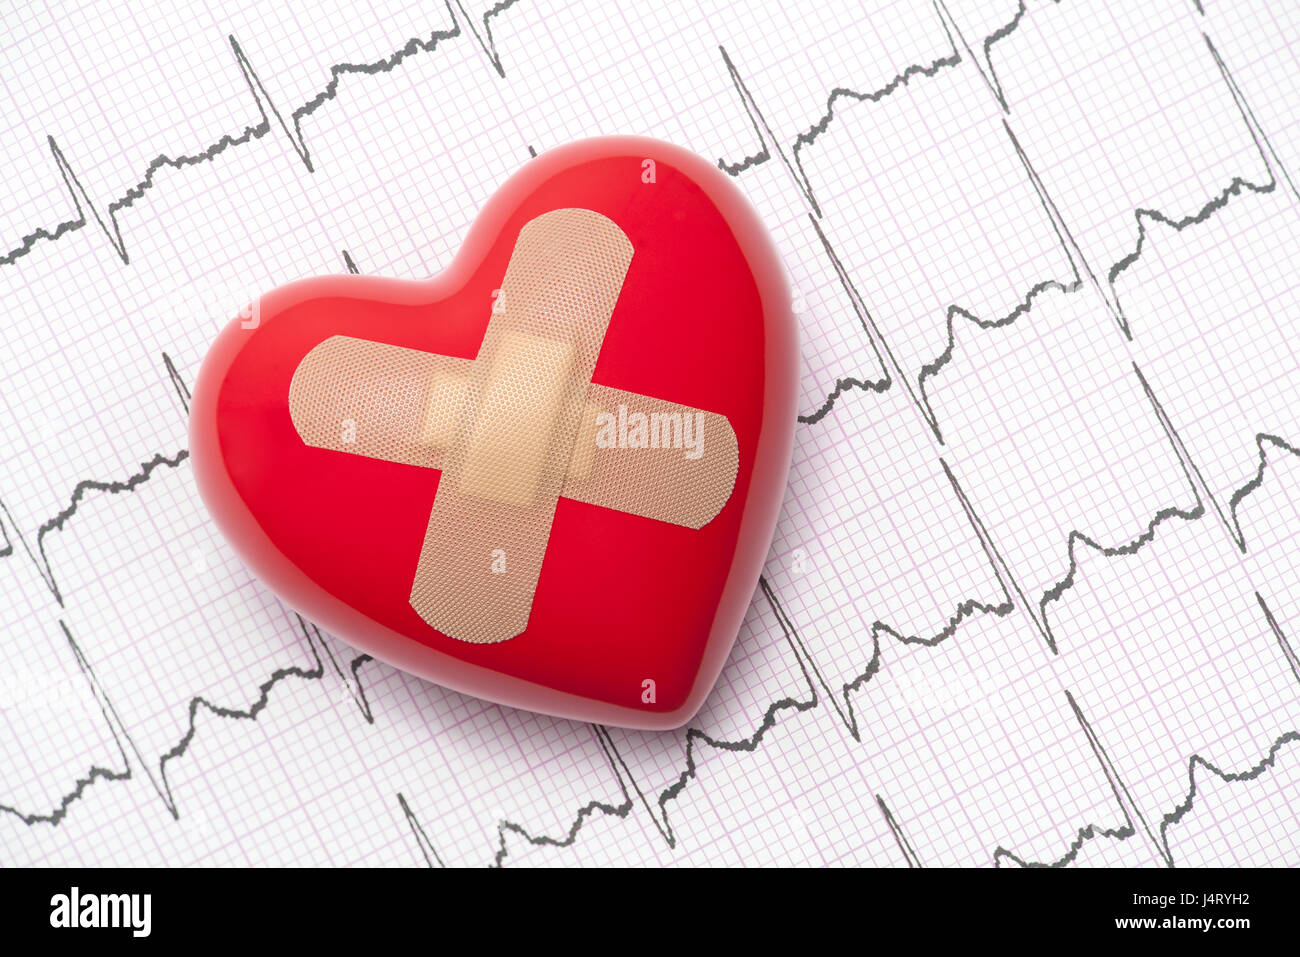 Red heart with adhesive plaster on electrocardiogram (ECG, EKG) Stock Photo